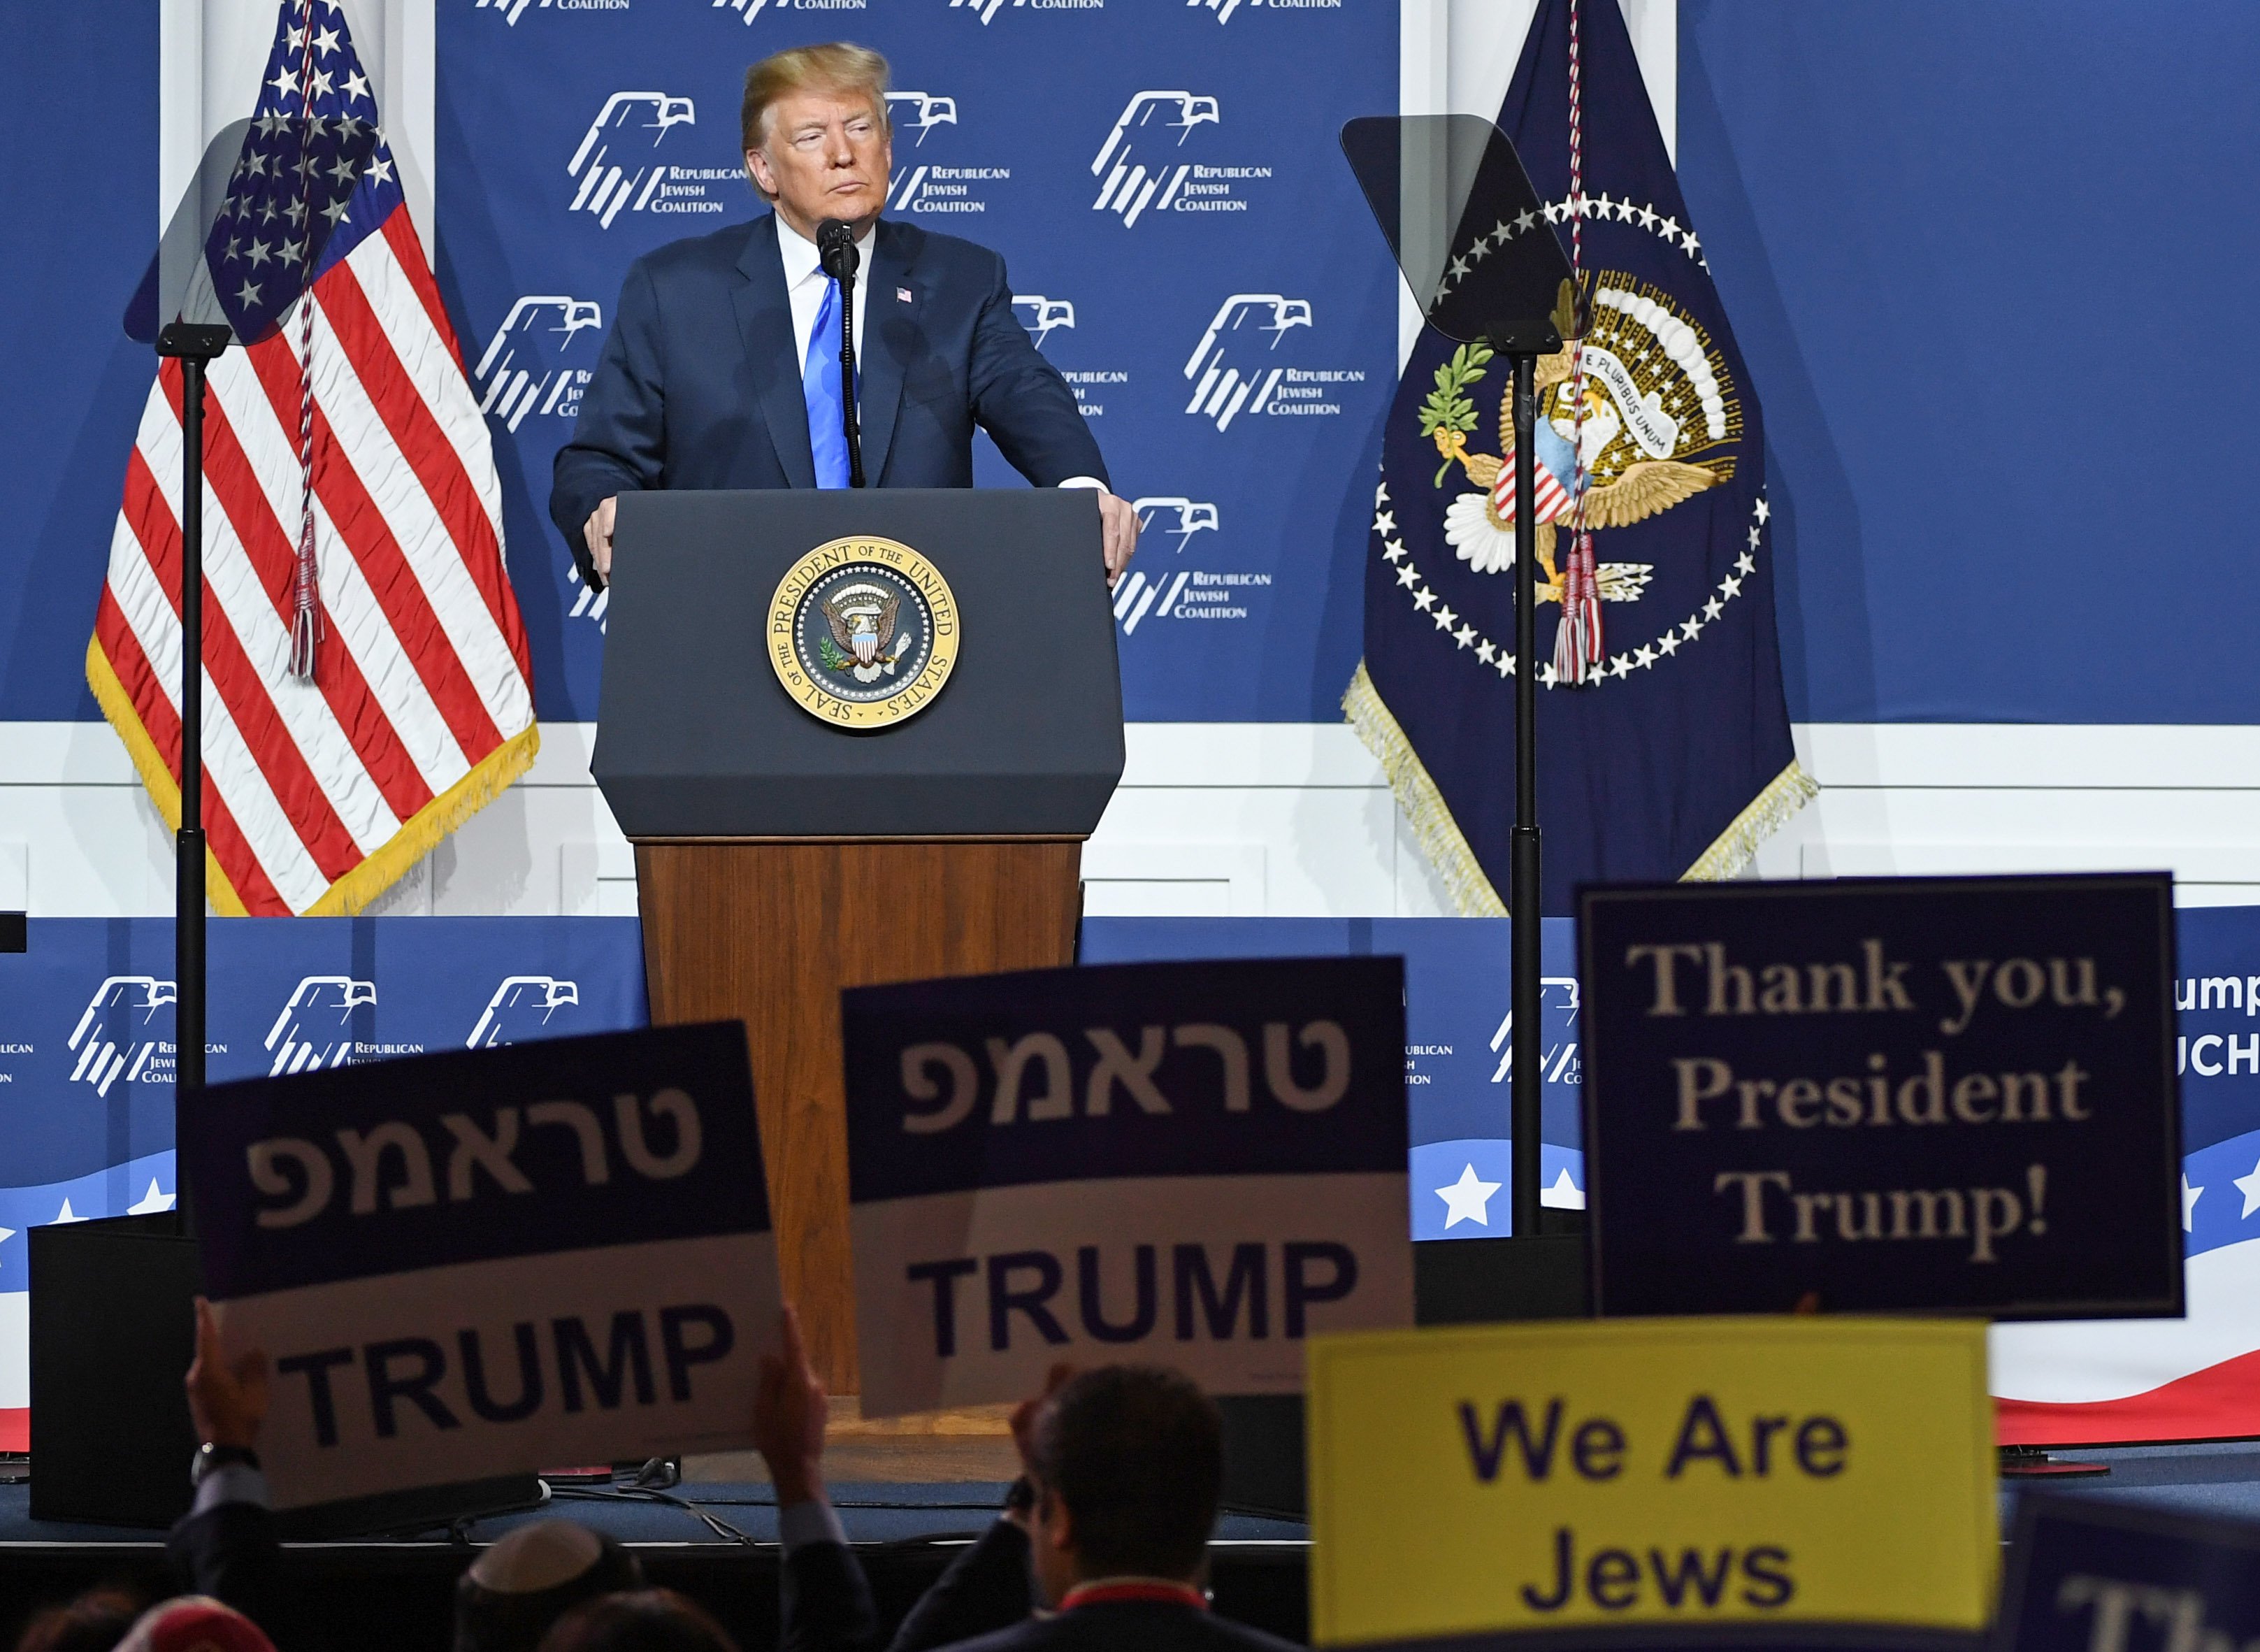 Donald Trump delivering a speech at the resident Donald Trump speaks during the Republican Jewish Coalition's annual meeting at The Venetian Las Vegas | Photo: Getty Images